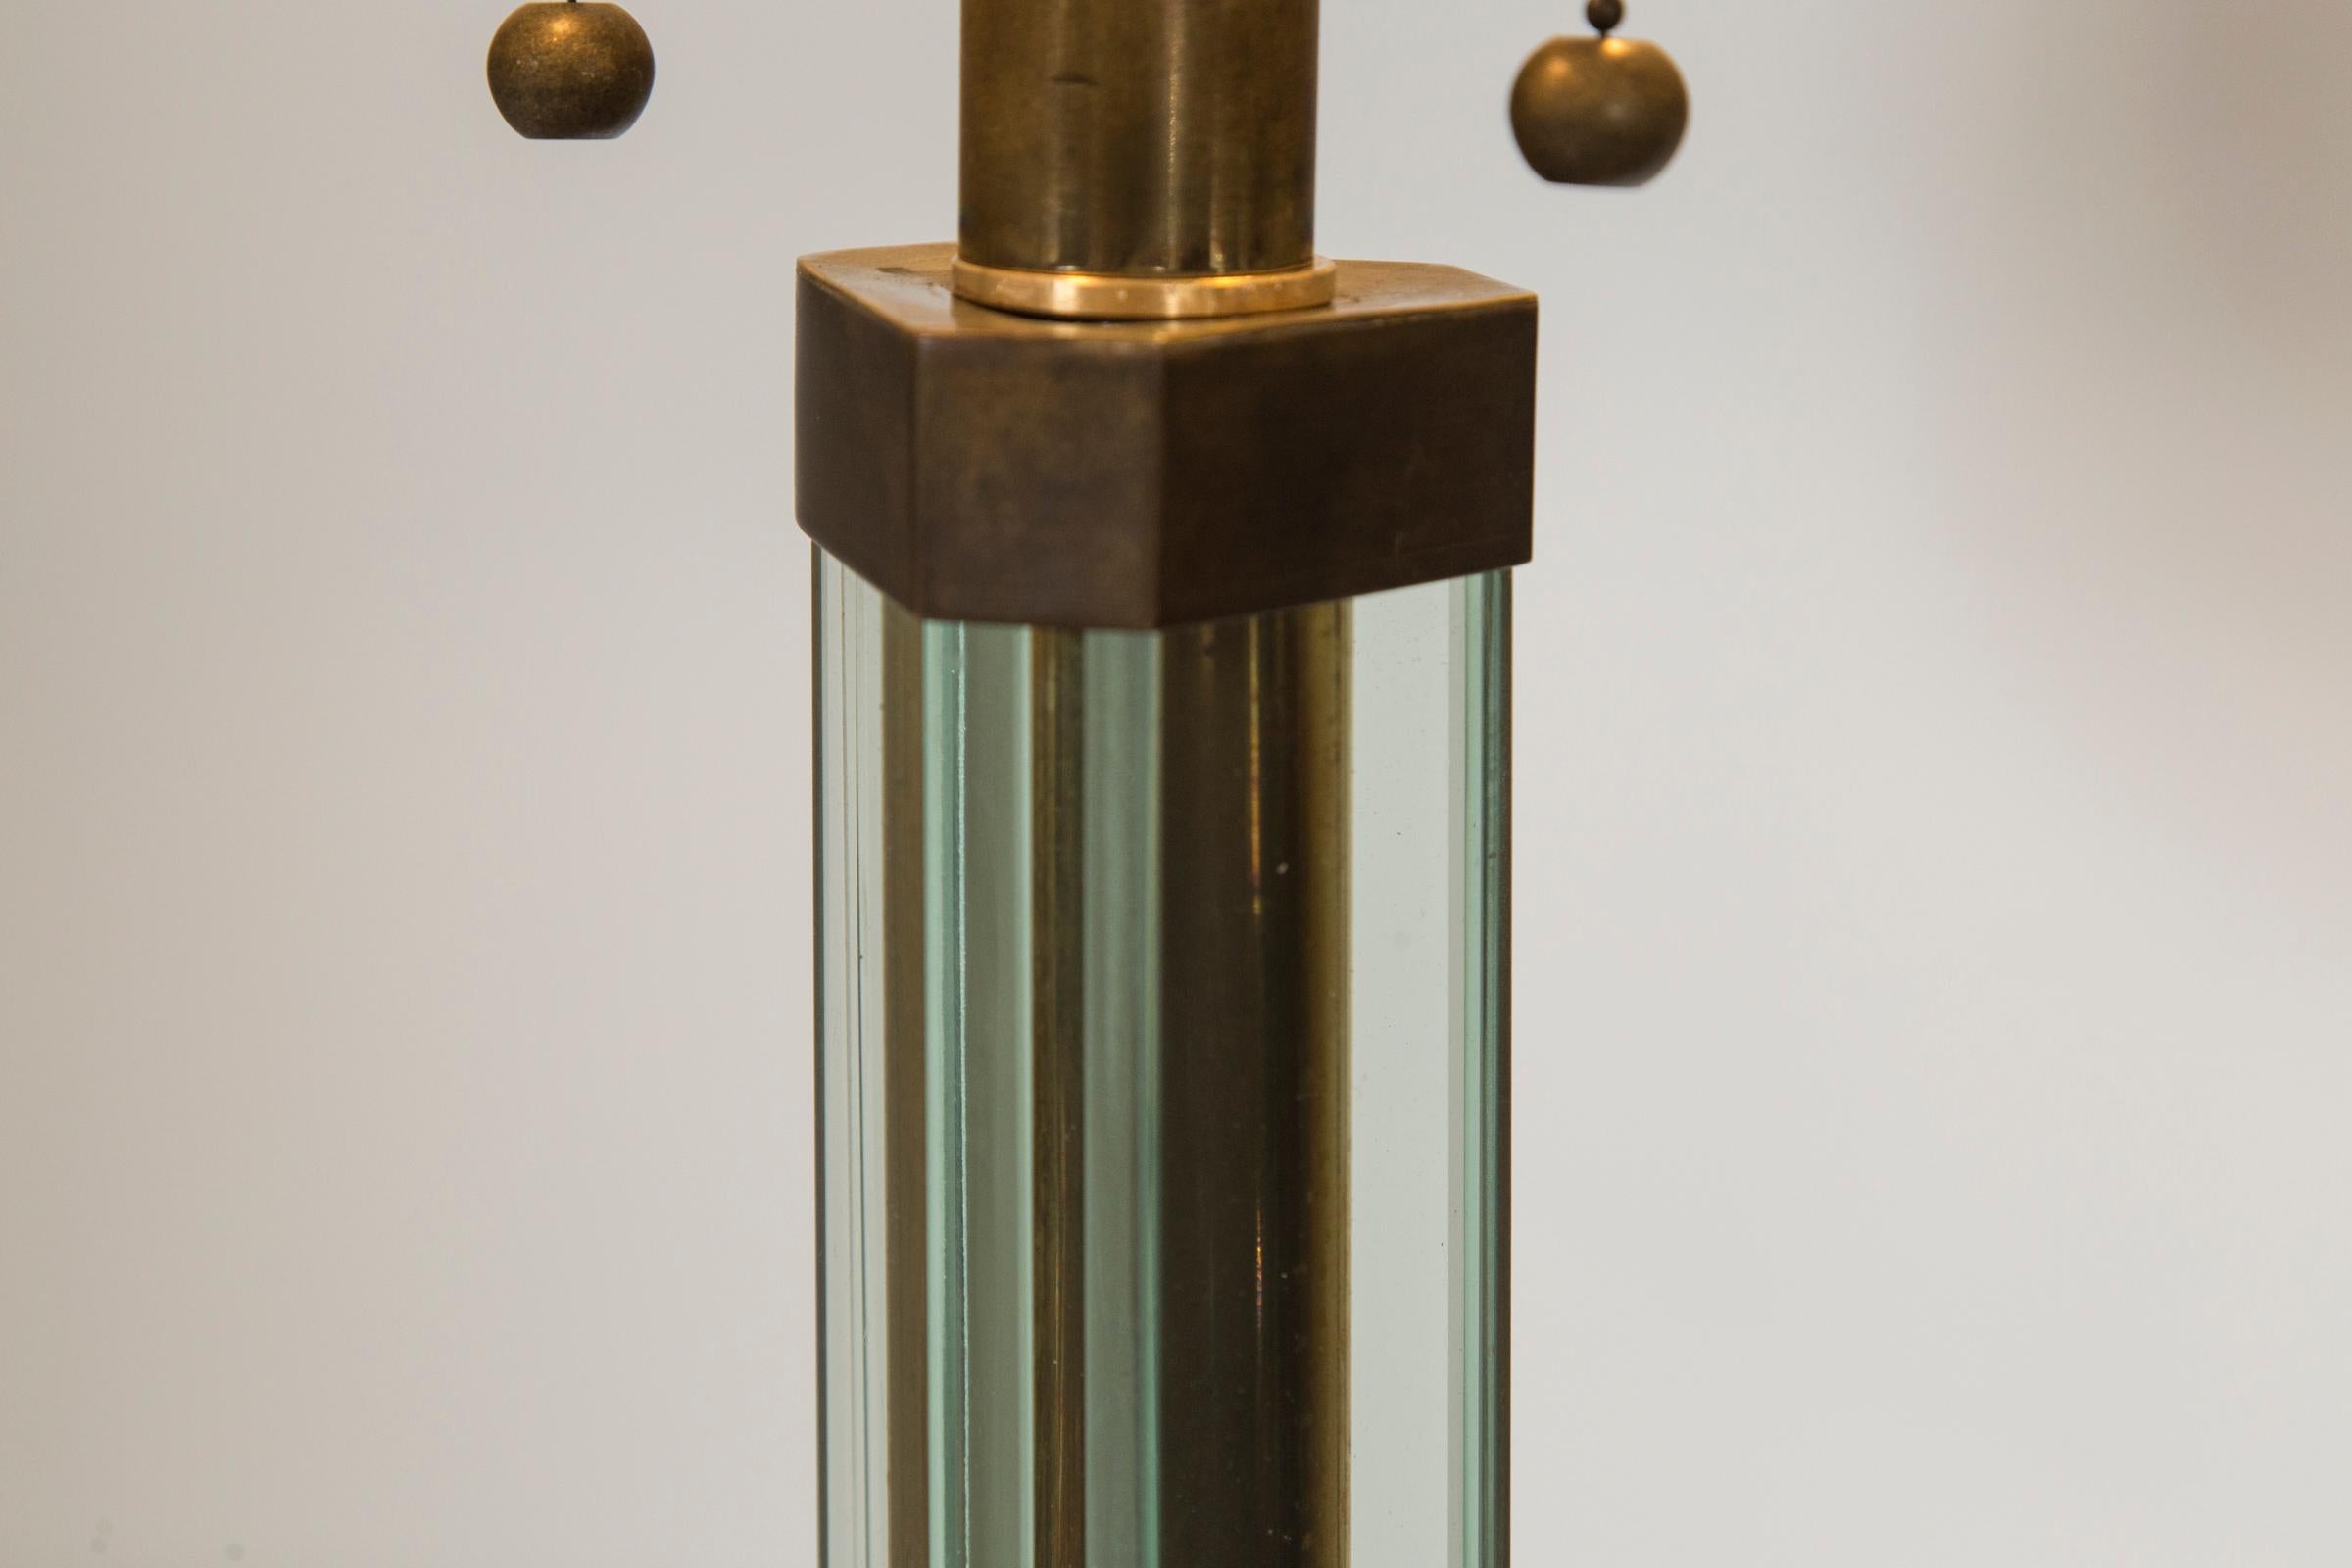 A lovely standing lamp with triangular shaped glass center shaft supported by brass fittings finishing on a hexagonal shaped glass base. The base is supllied with its original brass sfittings which serve as feet that can calibrate for level